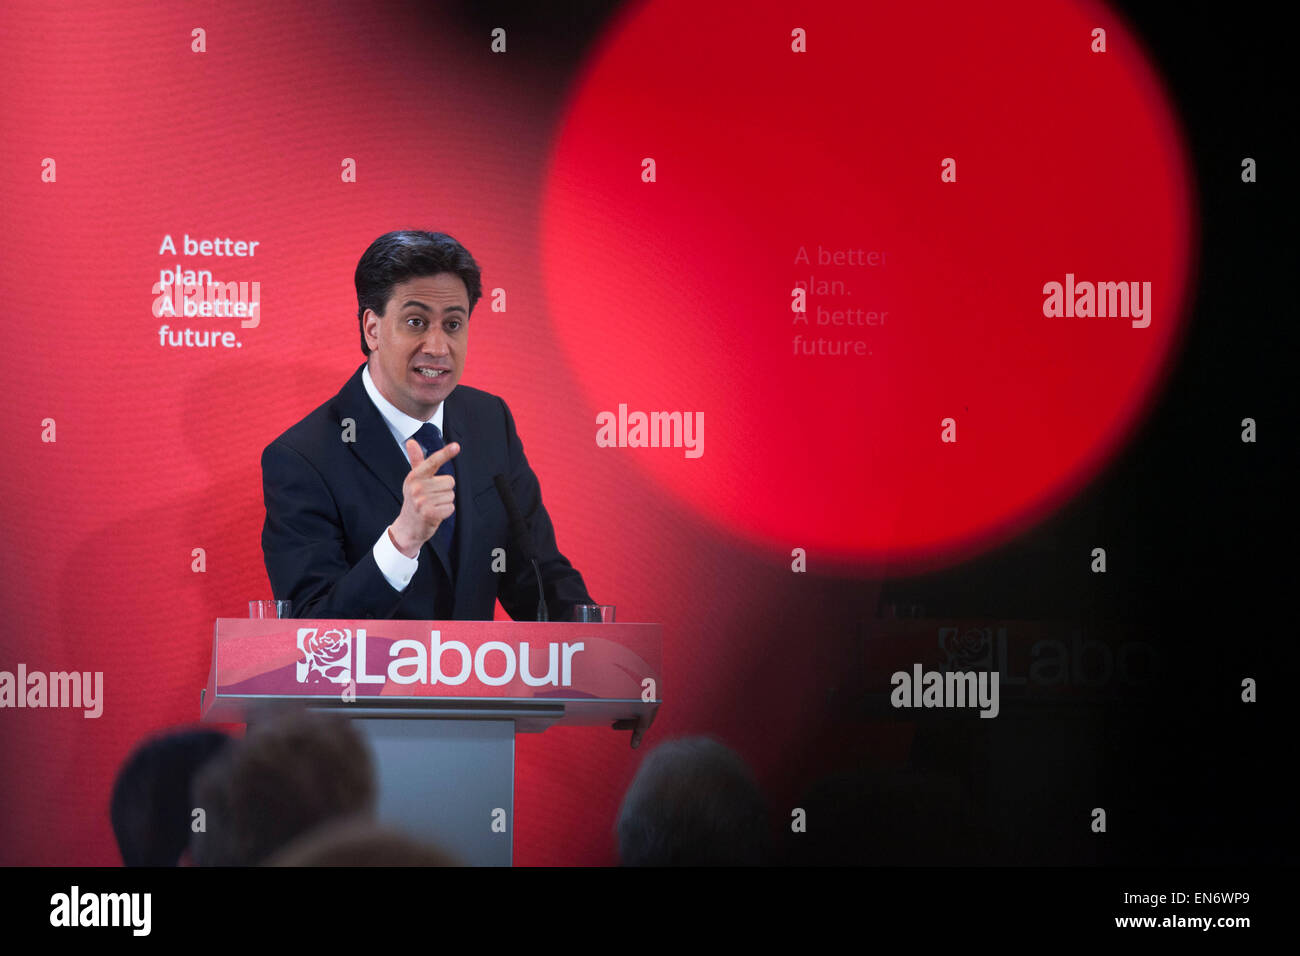 London, UK. Wednesday 29th April 2015. Labour Party Leader Ed Miliband speaks at a General Election 2015 campaign event on the Tory threat to family finances, entitled: The Tories’ Secret Plan. Held at the Royal Institute of British Architects. Credit:  Michael Kemp/Alamy Live News Stock Photo